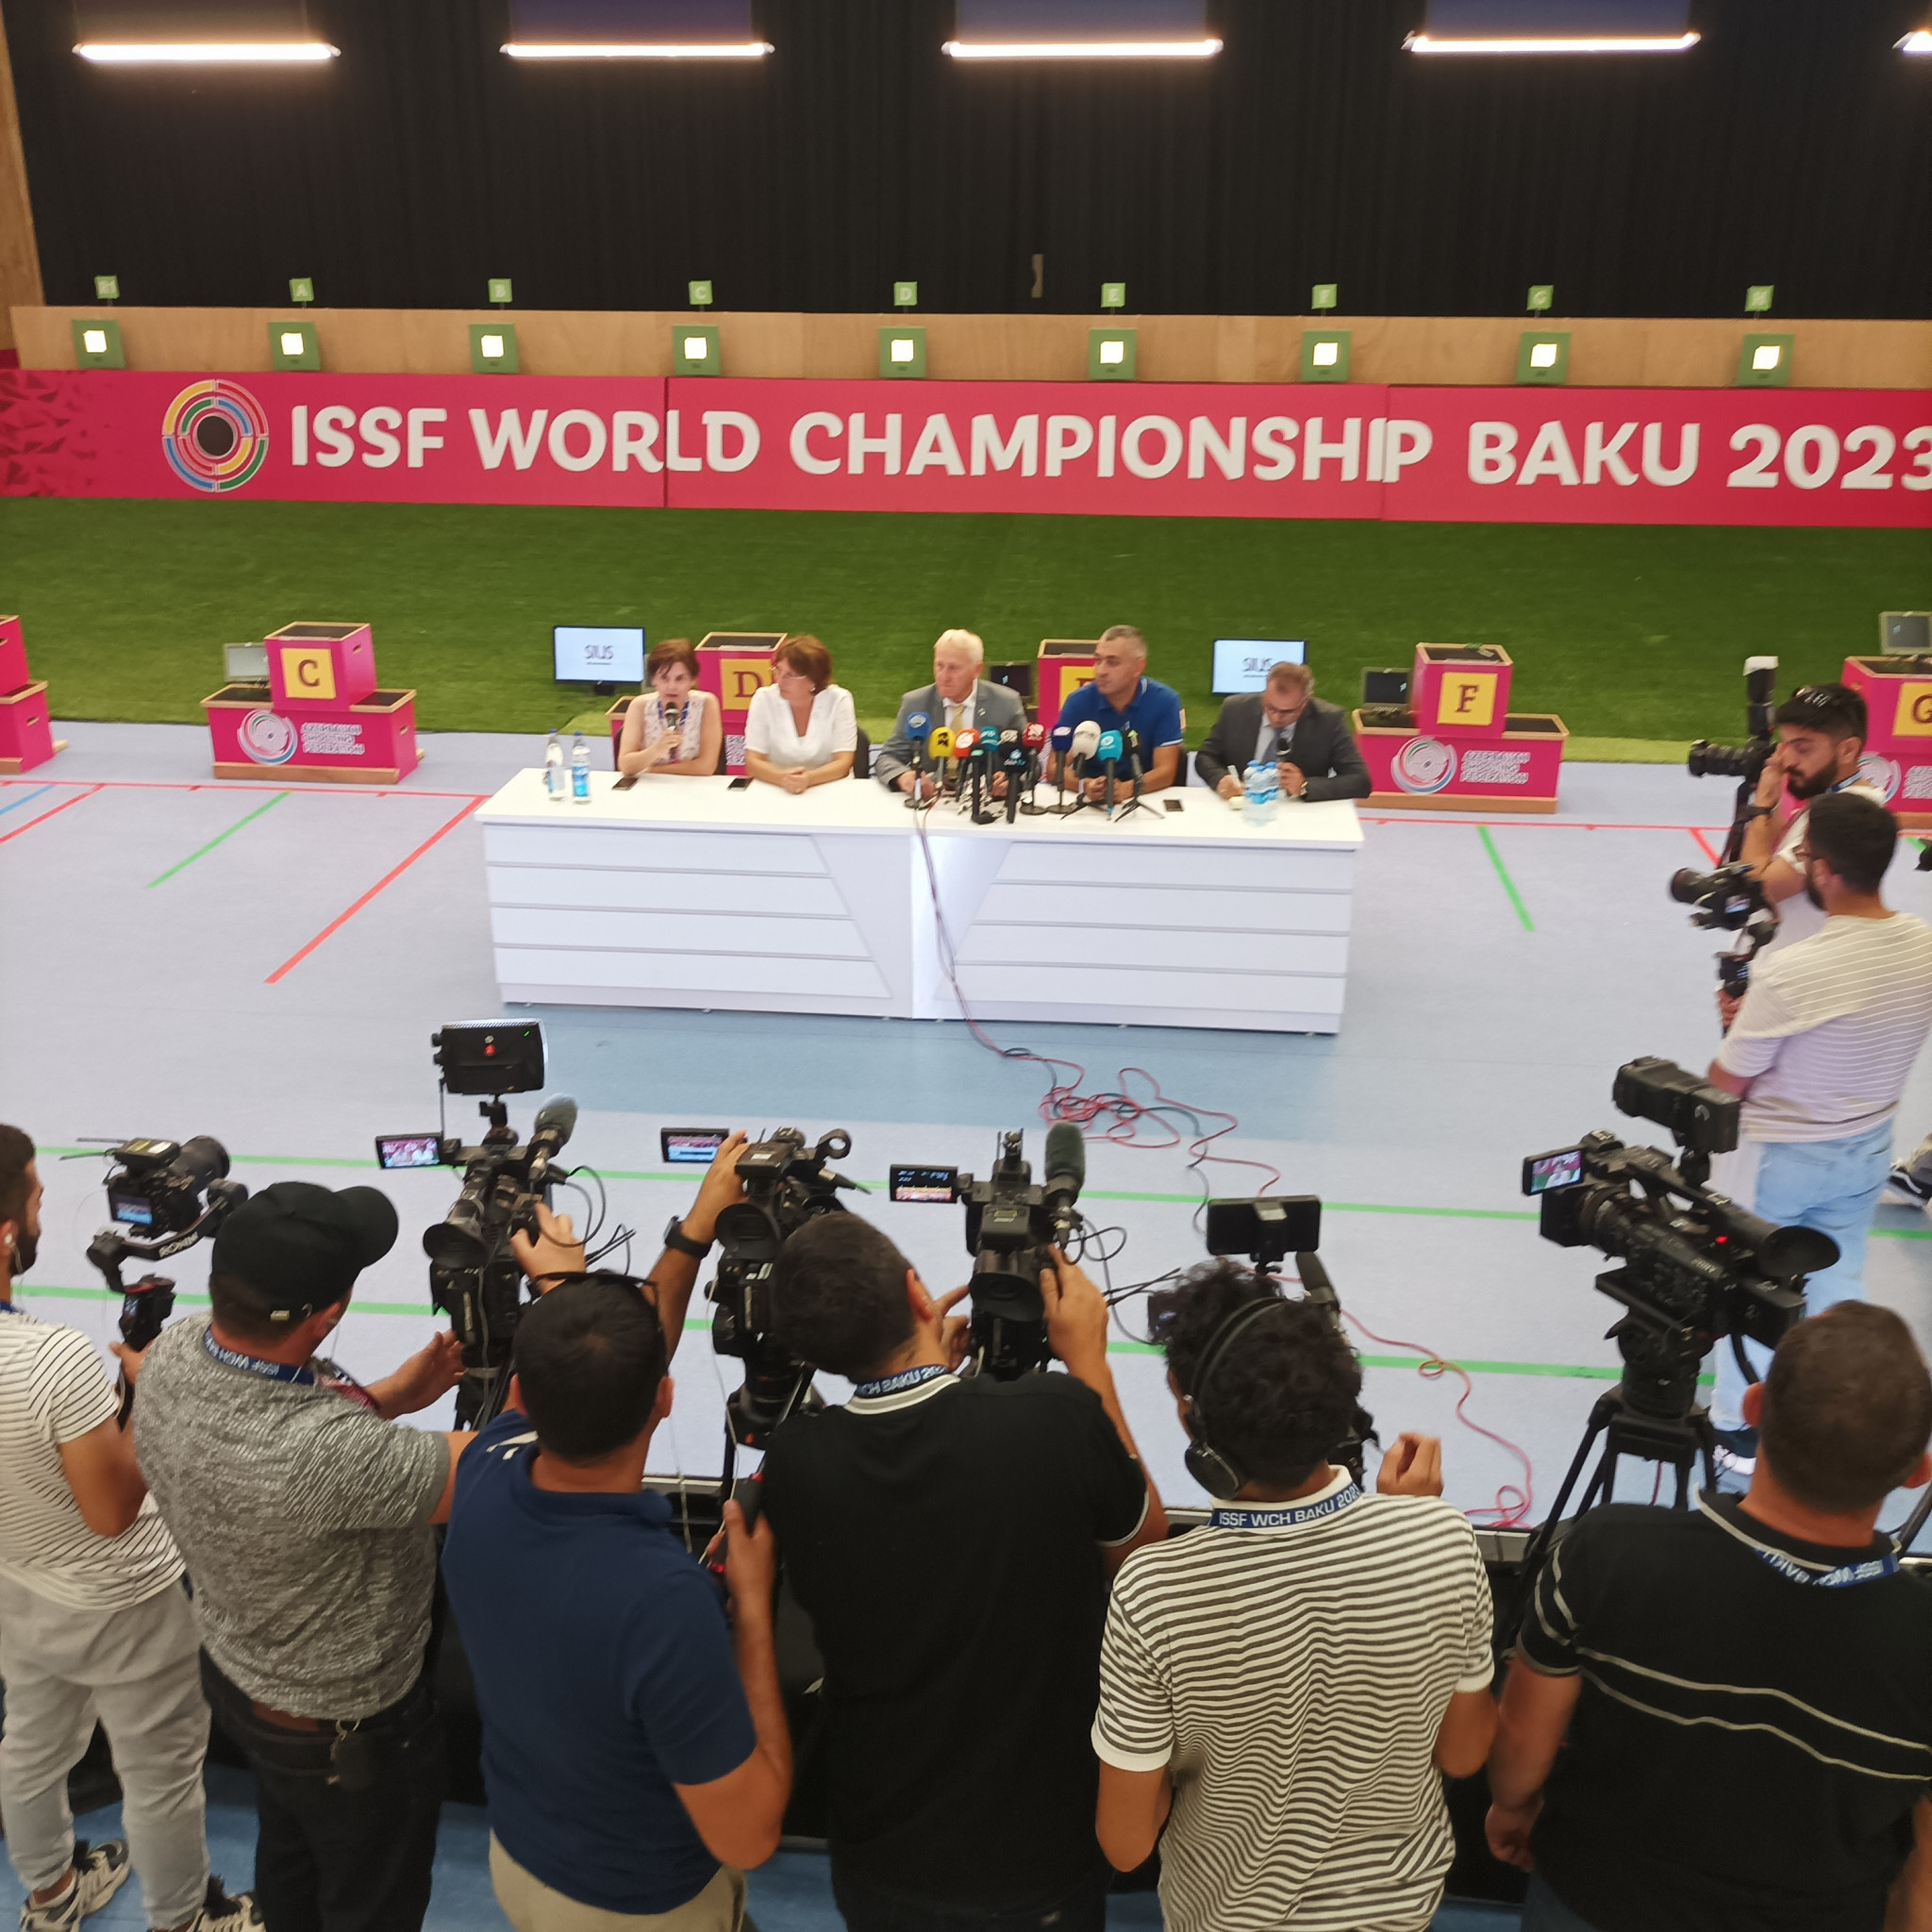 ISSF secretary general Willi Grill, centre, insisted that the World Championship Organising Committee had done everything to encourage Armenian participation in Baku ©ITG